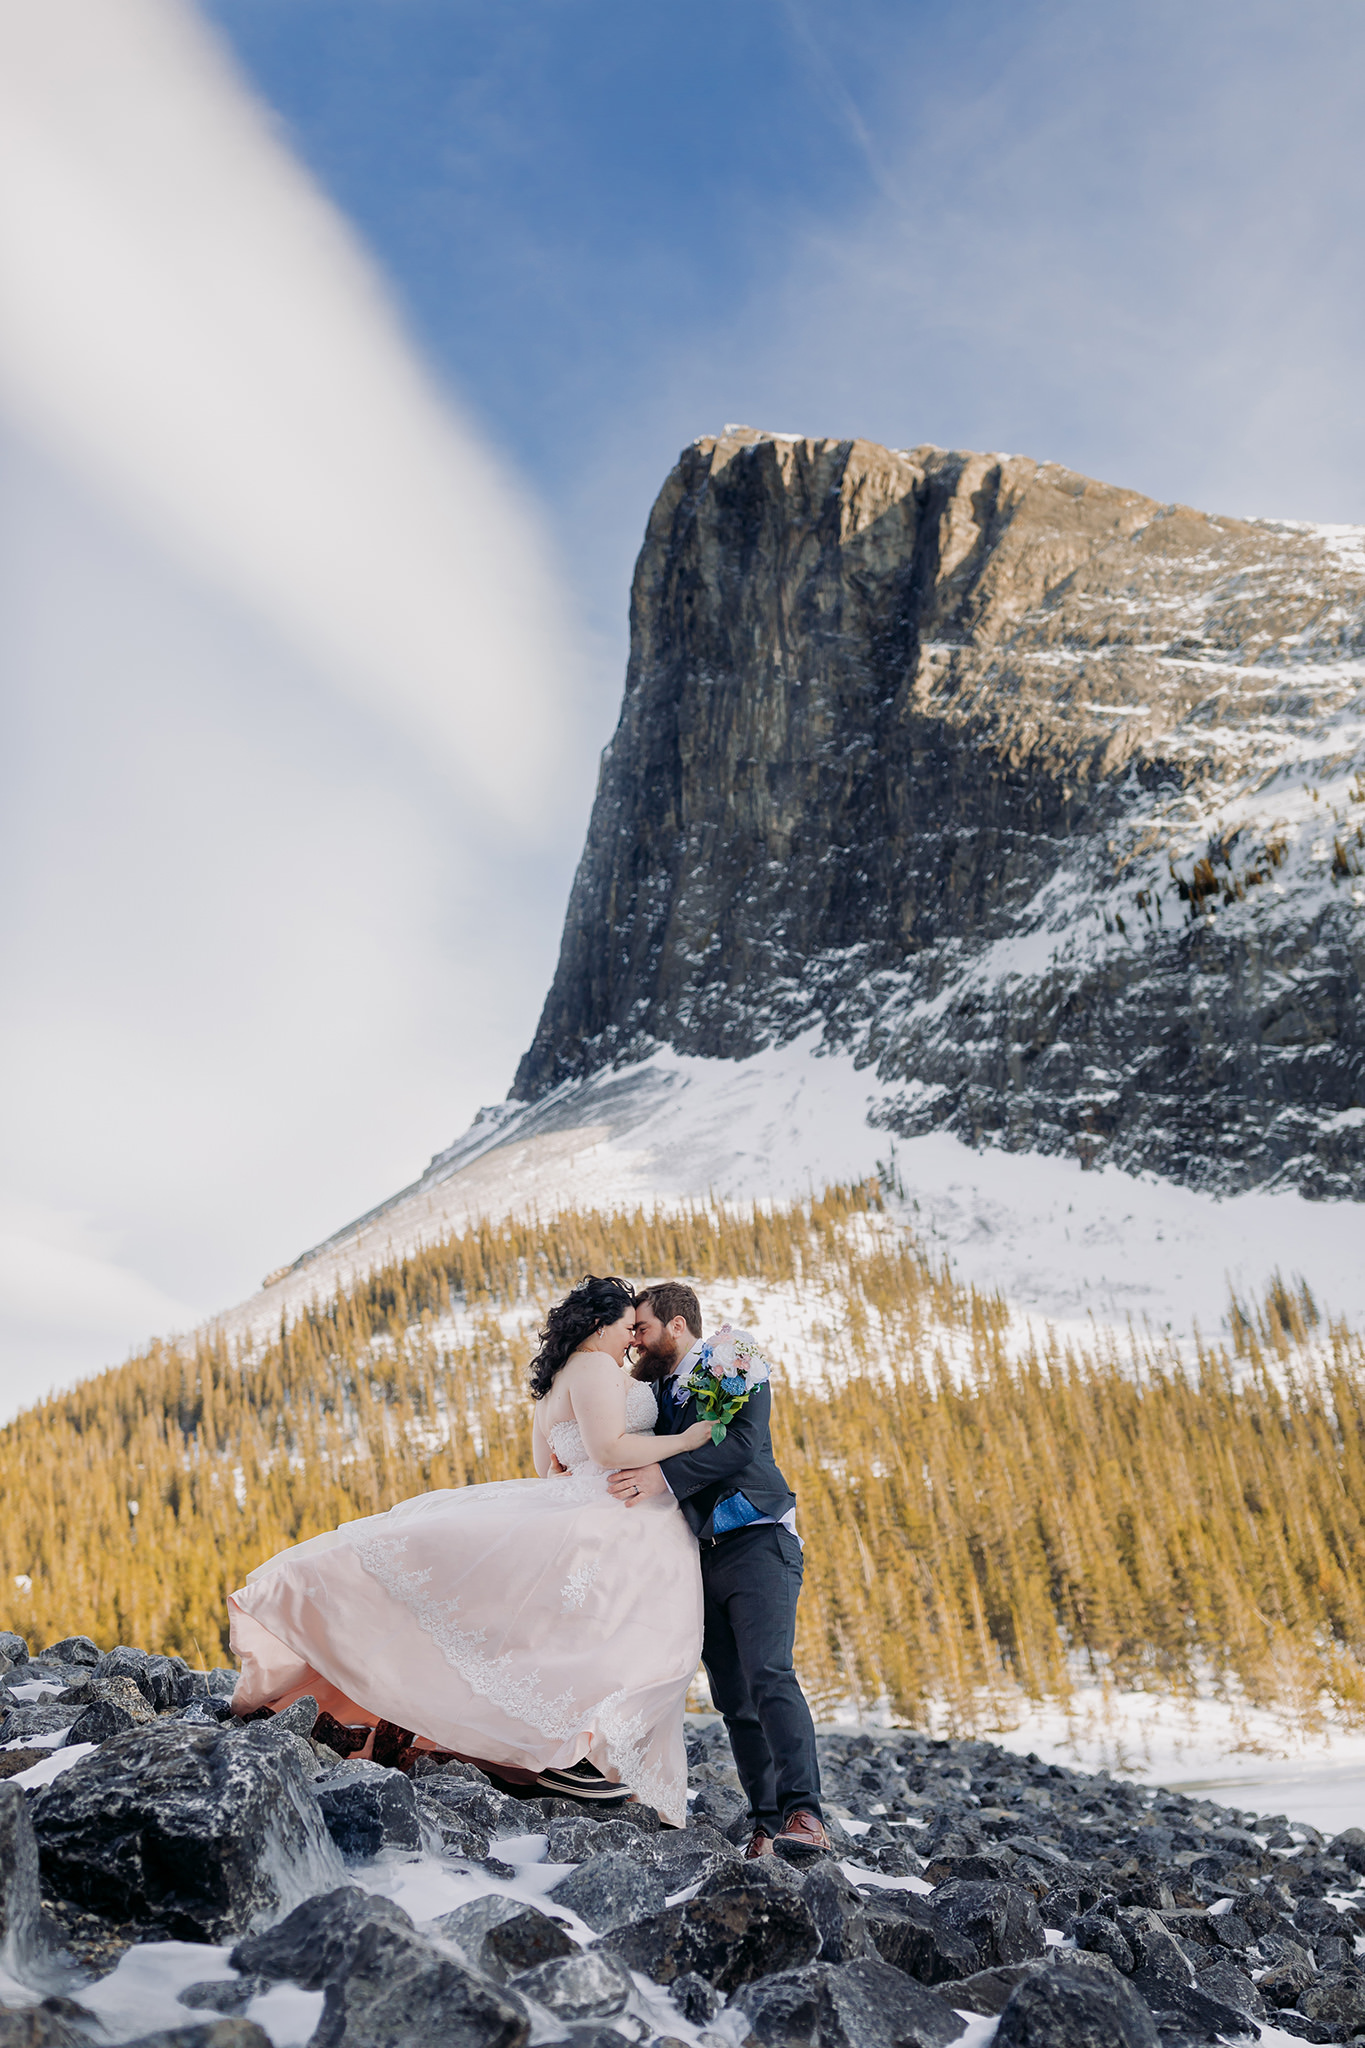 Falcon Crest Lodge wedding Canmore winter wedding photos bride & groom at Goat Pond in Kananaskis photographed by ENV Photography Ha Ling Peak